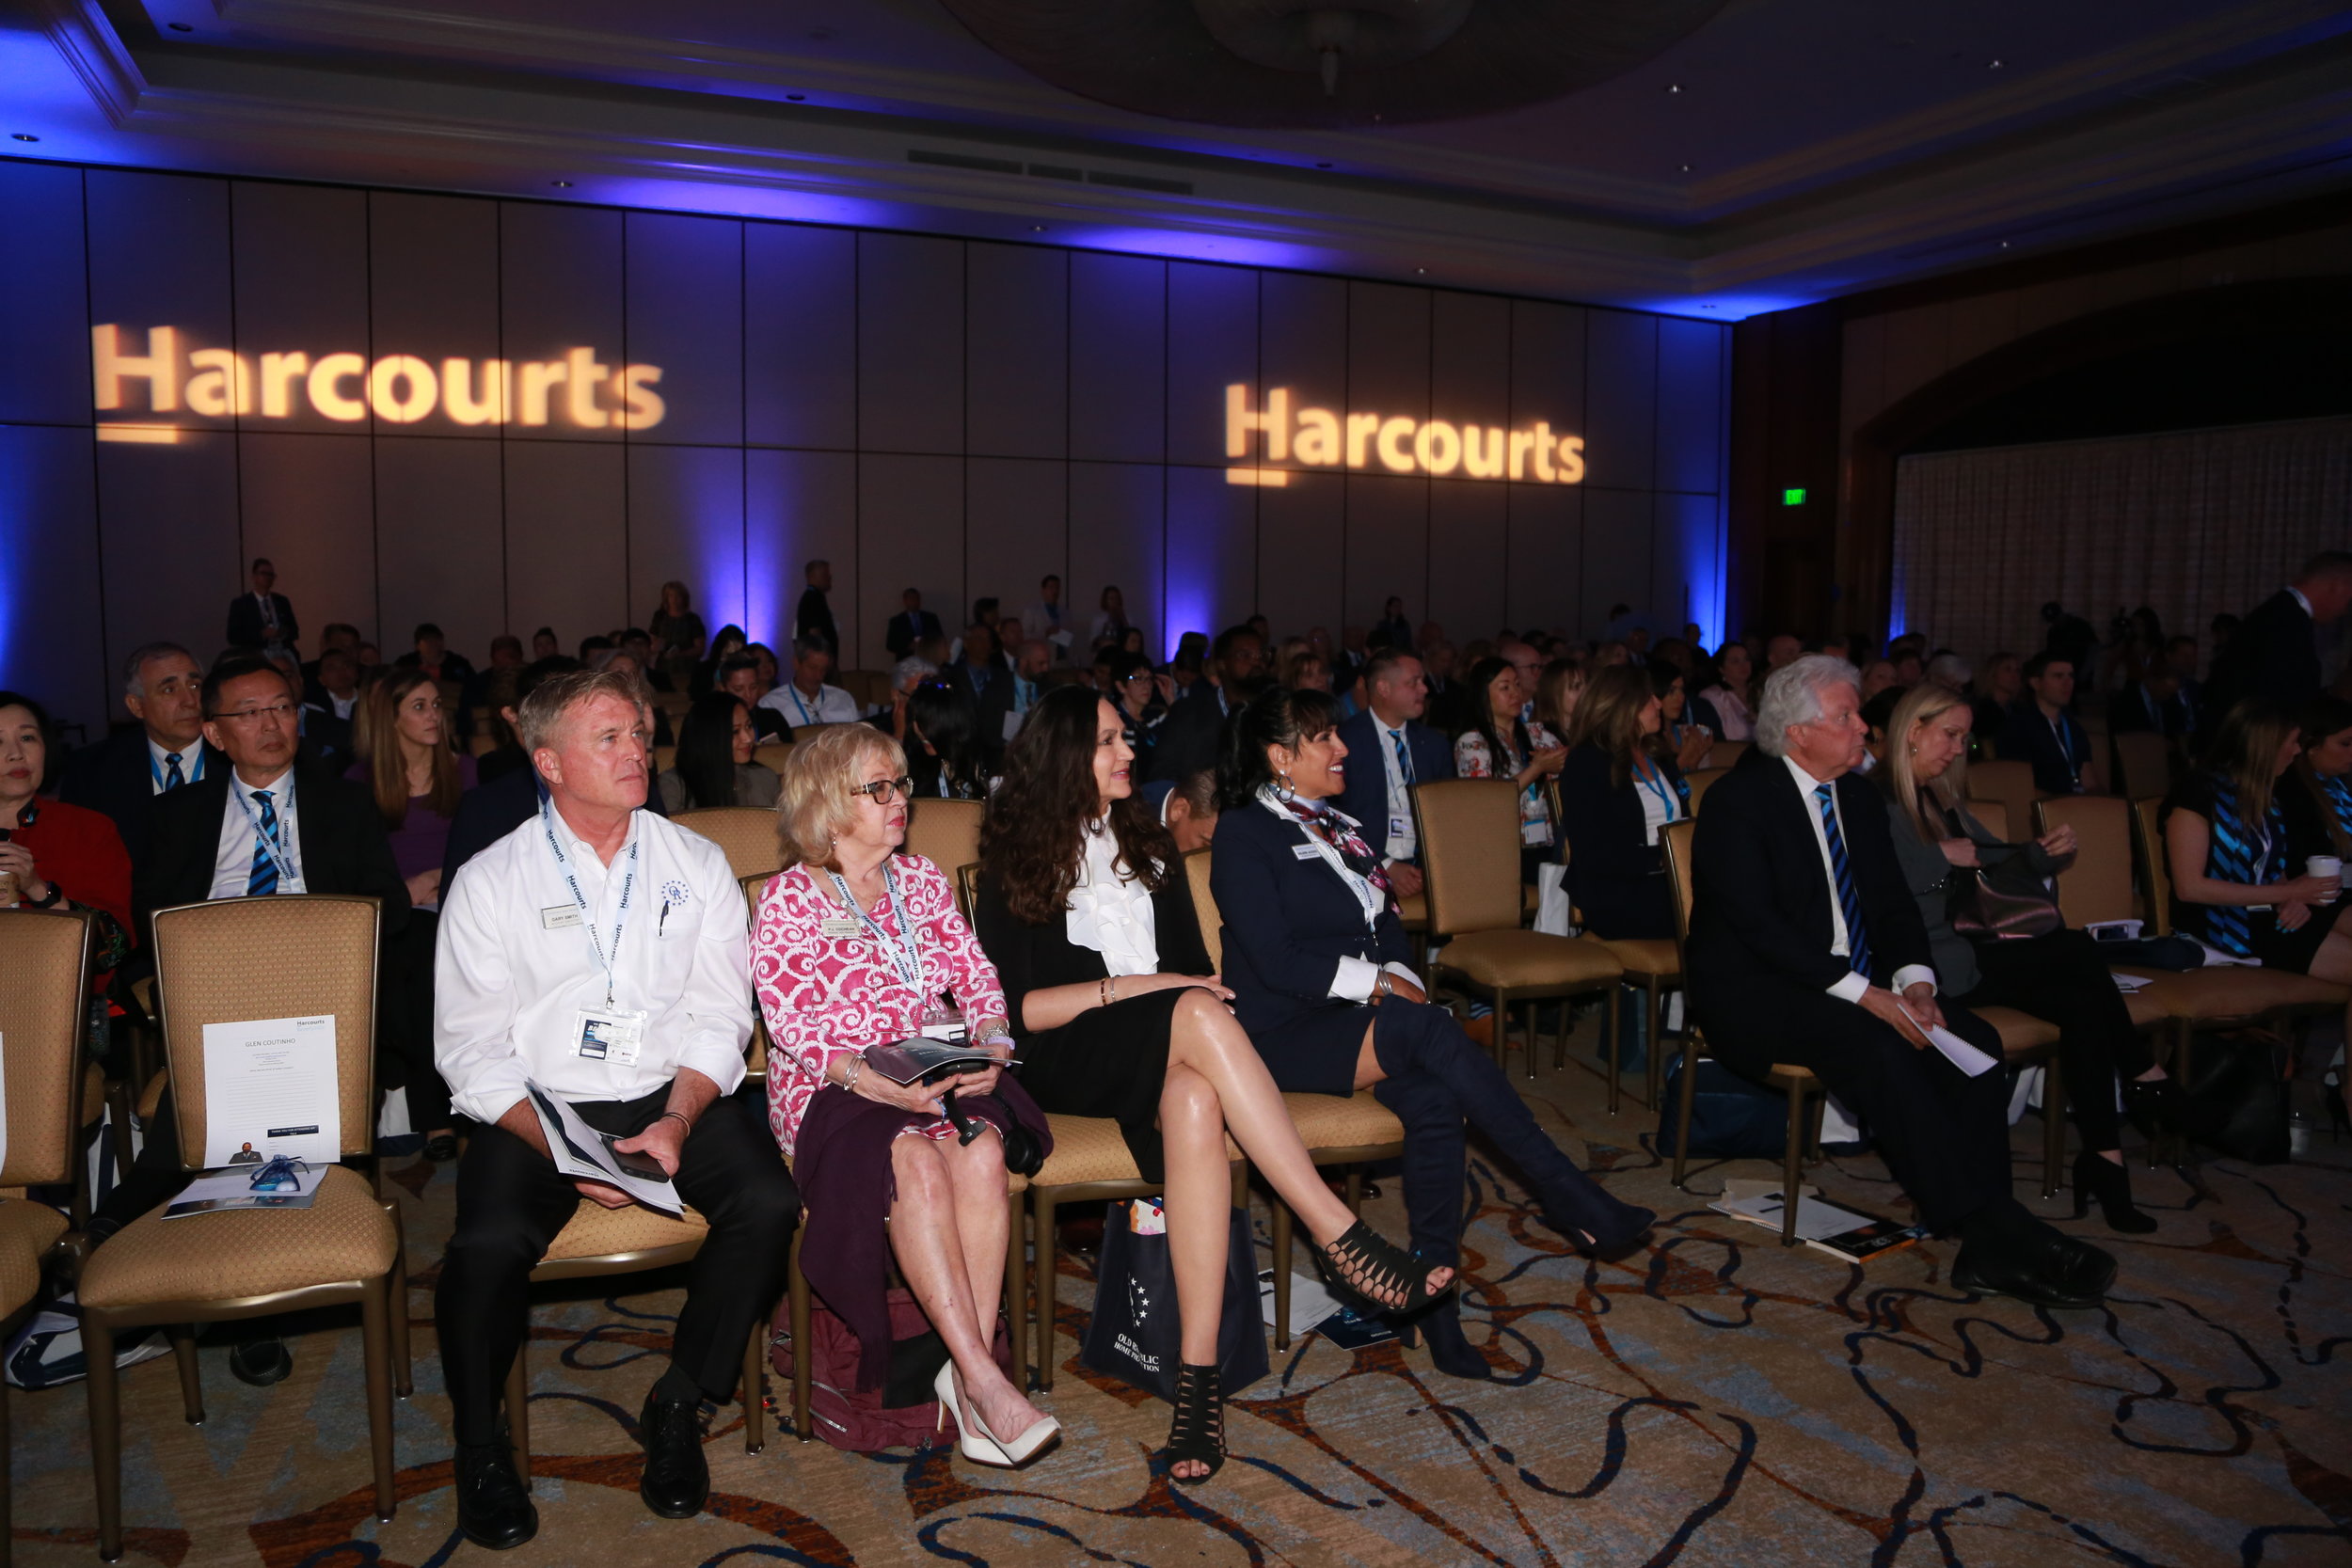 2019-03-26 Harcourts Conference - Day 2 1341.JPG